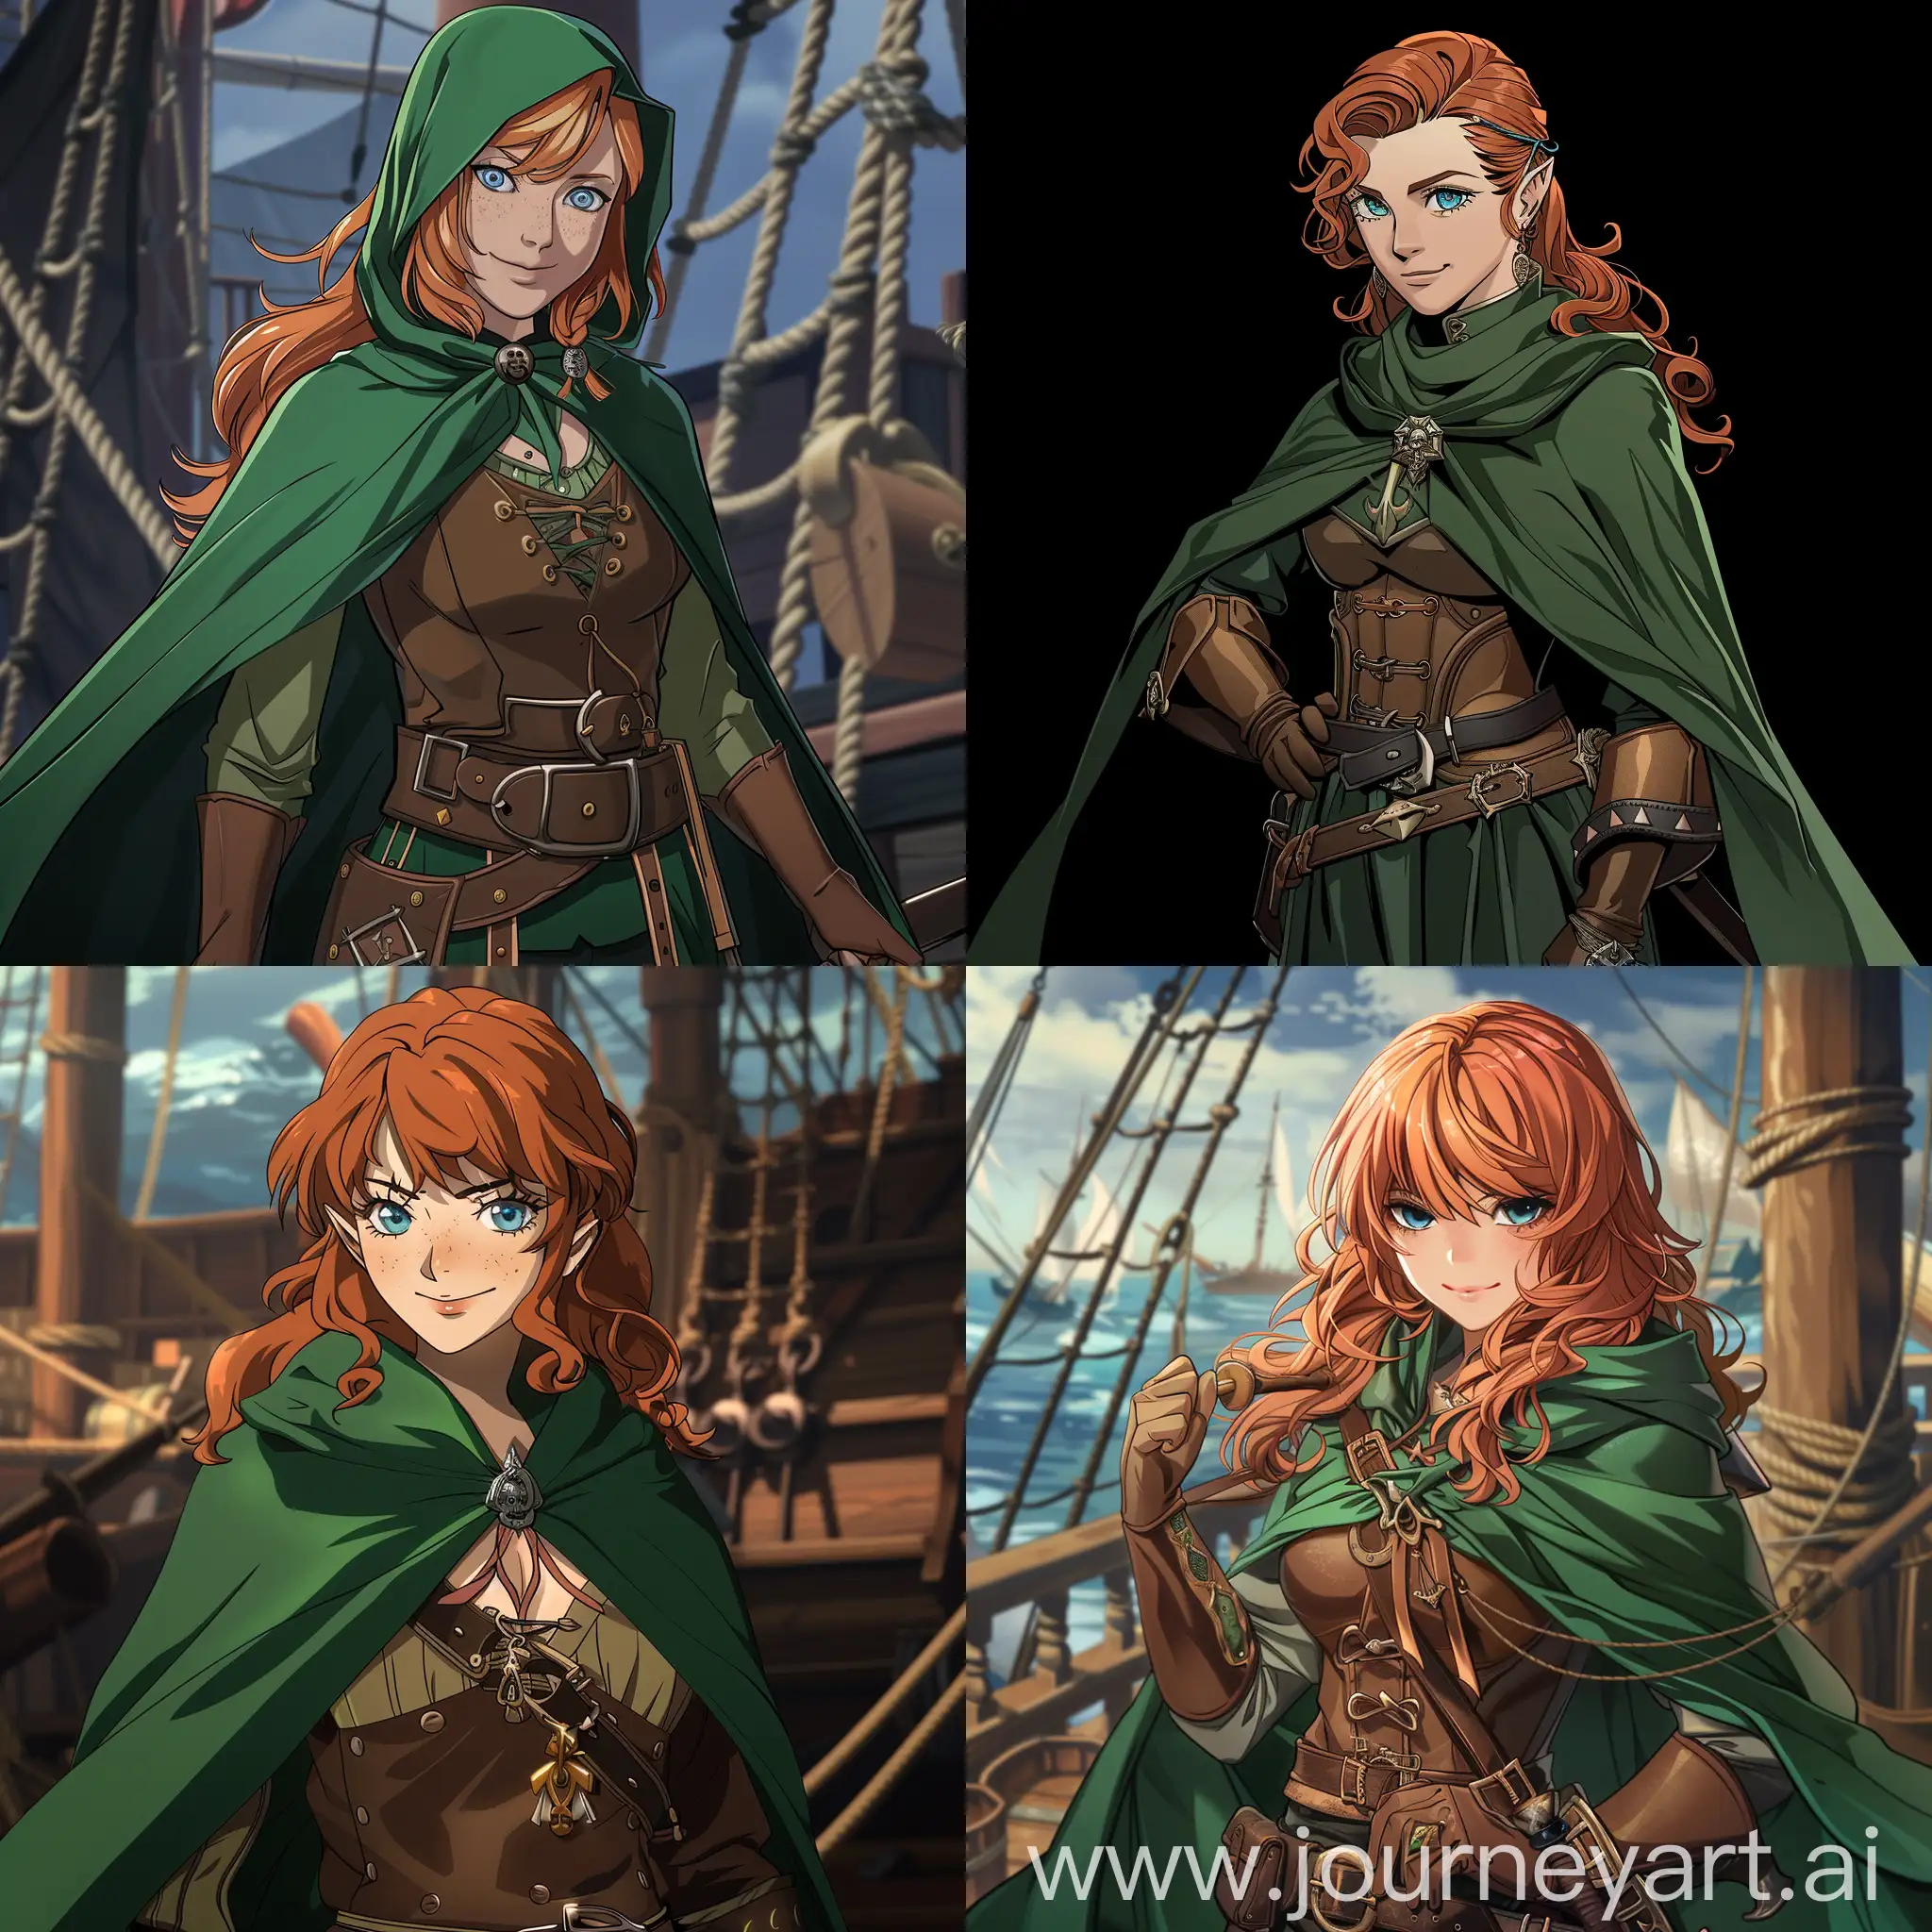 Pirate-Queen-Grace-OMalley-Regal-Naval-Conquest-in-Anime-Art